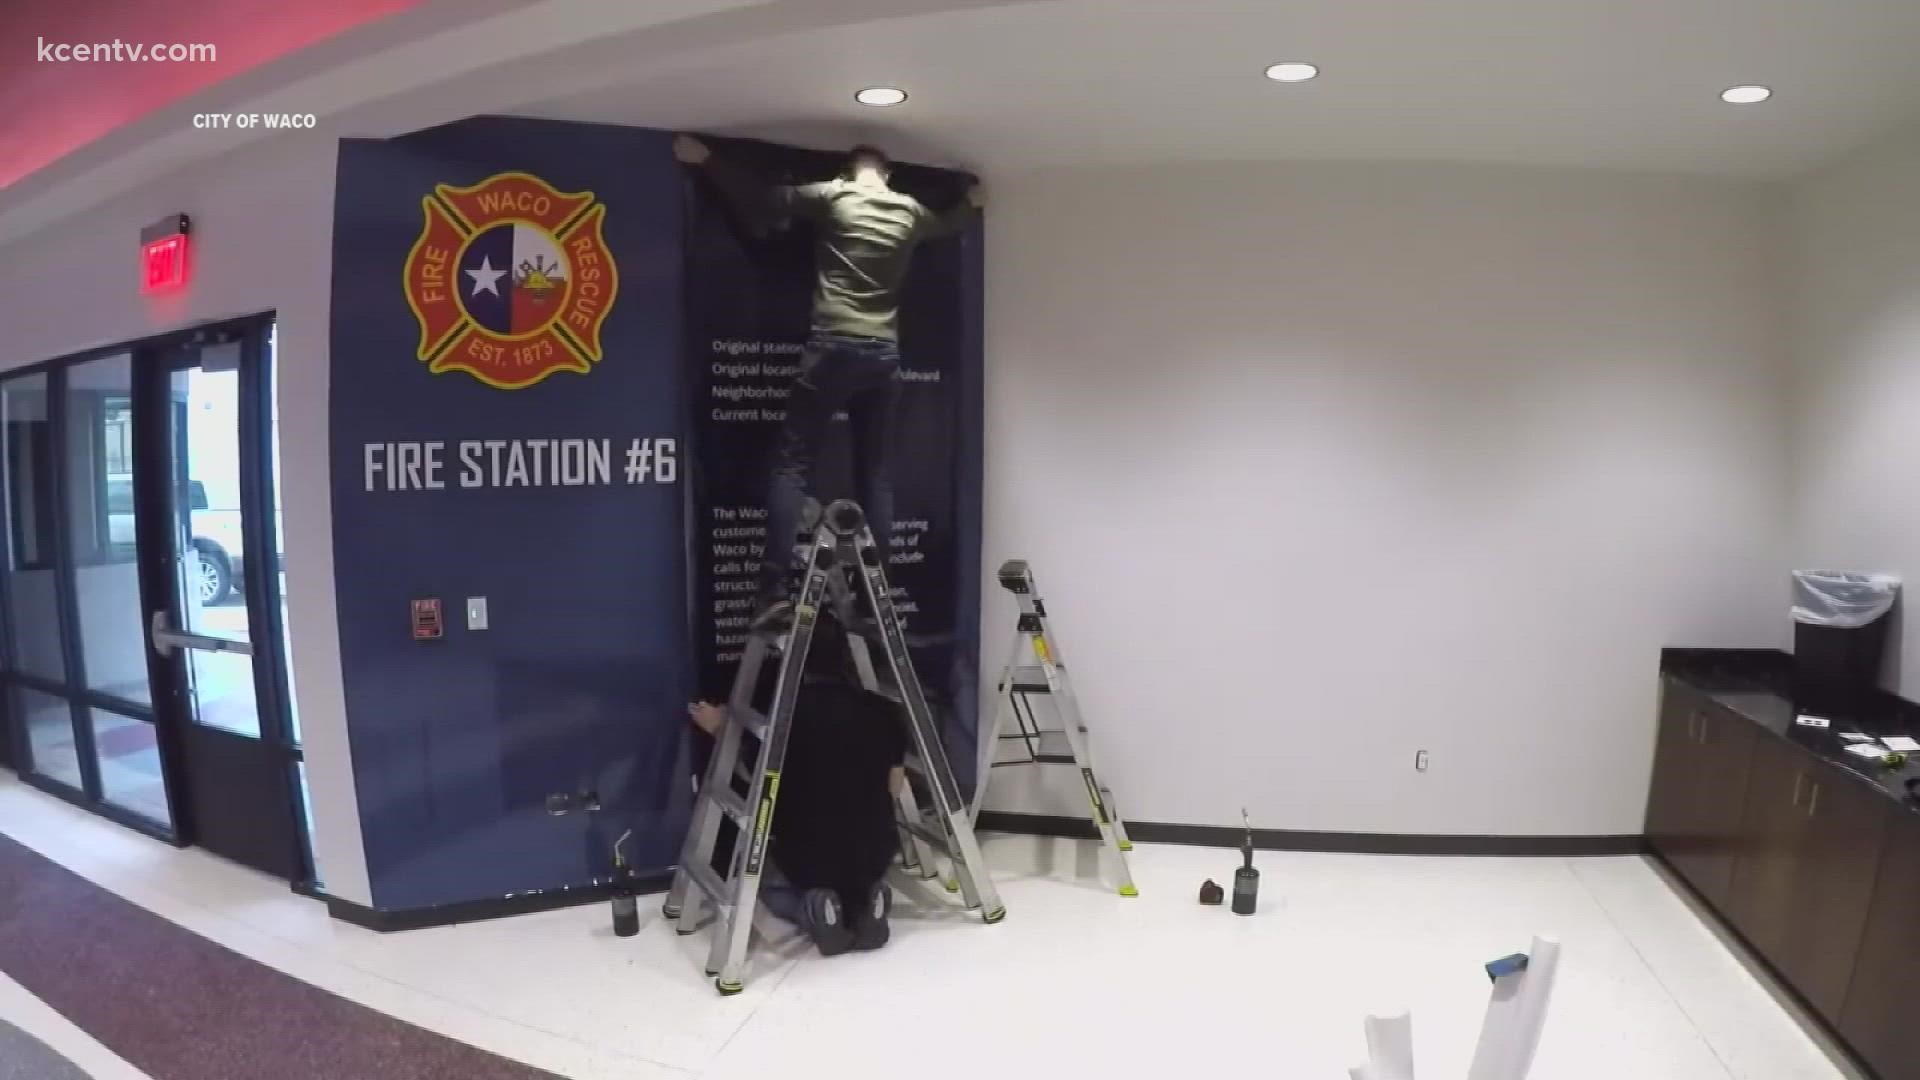 The city of Waco gears up for the opening of its new fire station Waco Fire Station No. 6 .